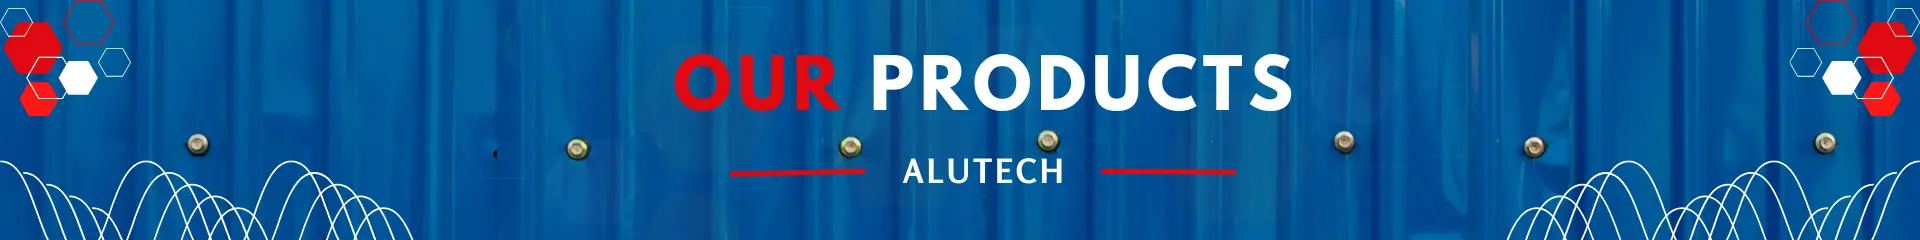 Our Products Banner | Alutech